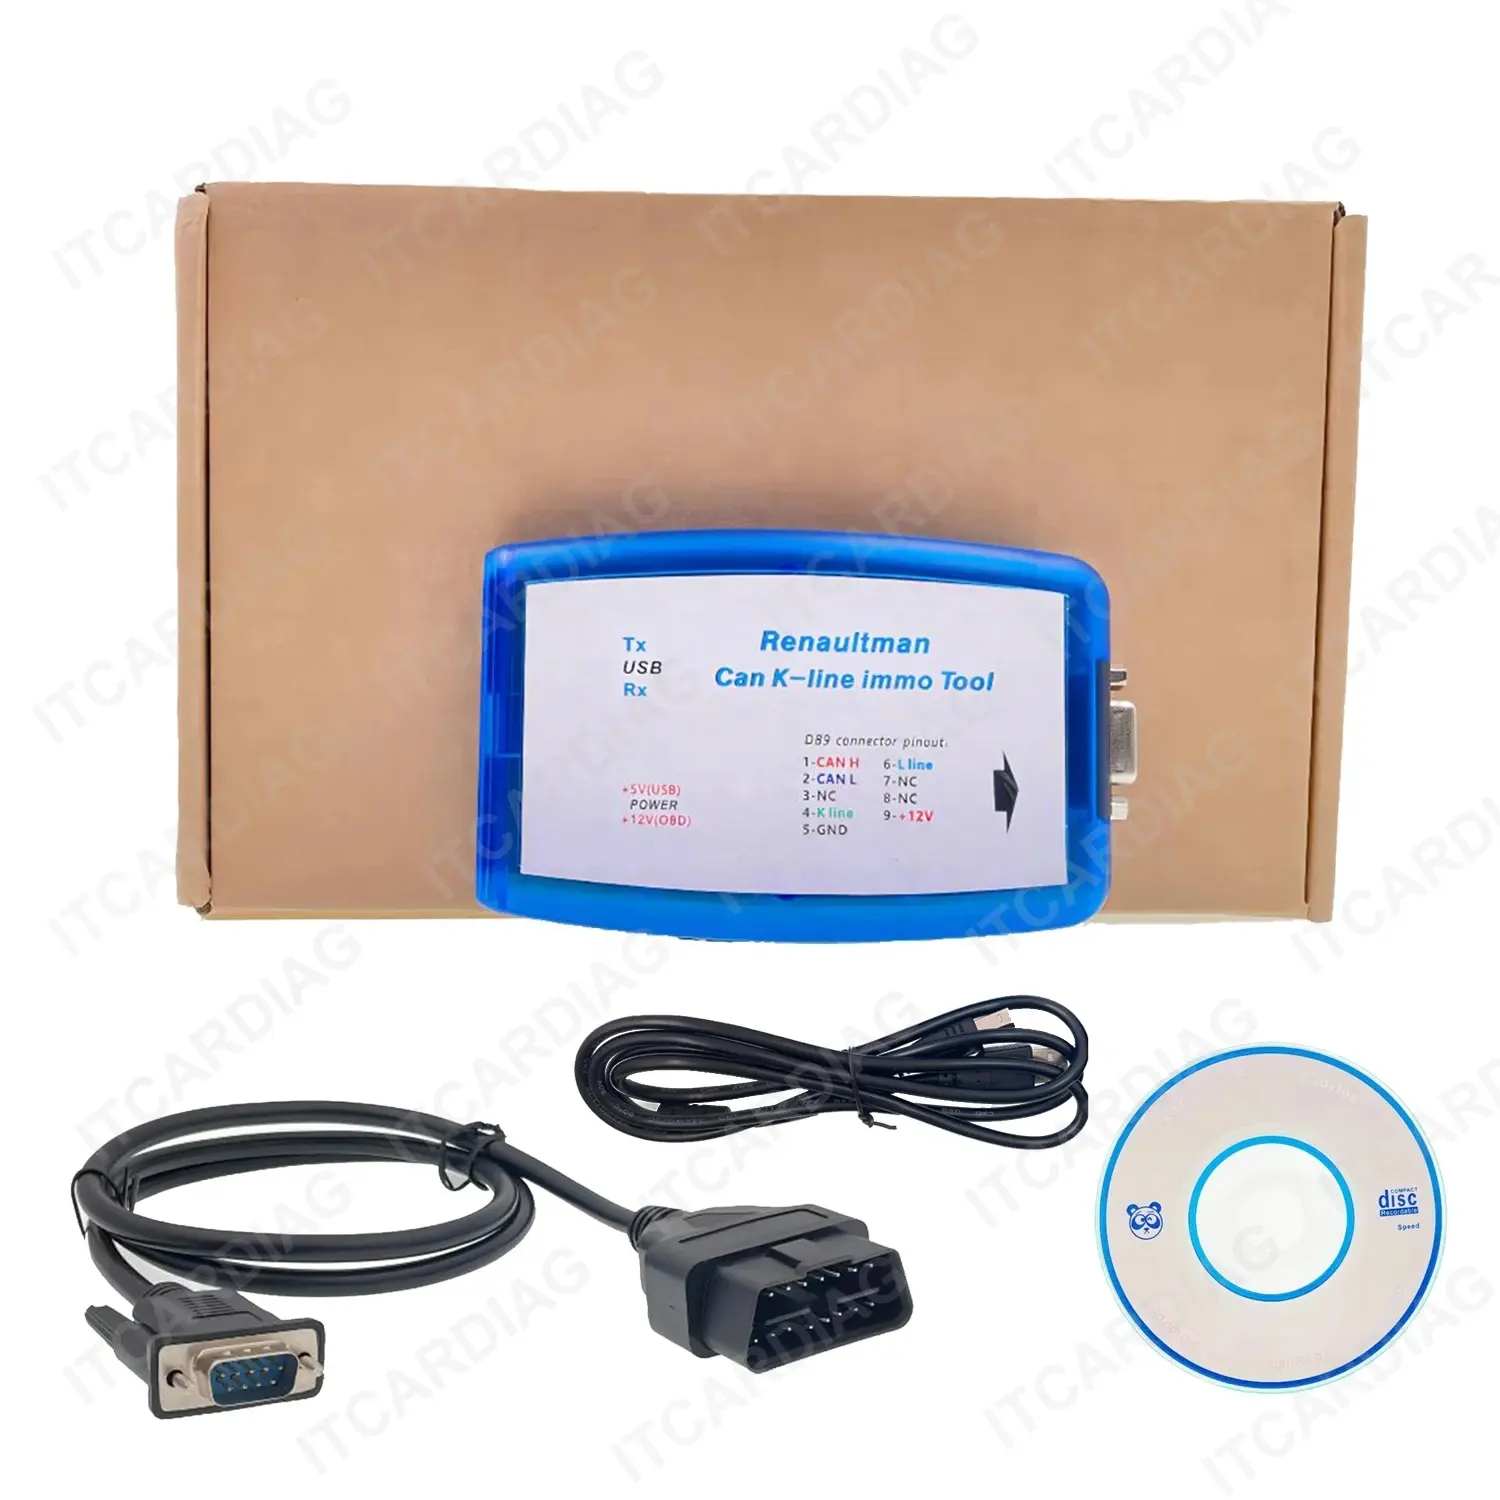 For Renault Renaultman Can K-line Immo V4.06 Tool ECU Programmer Read/Write EEPROM FLASH Clear Immobilizer Code